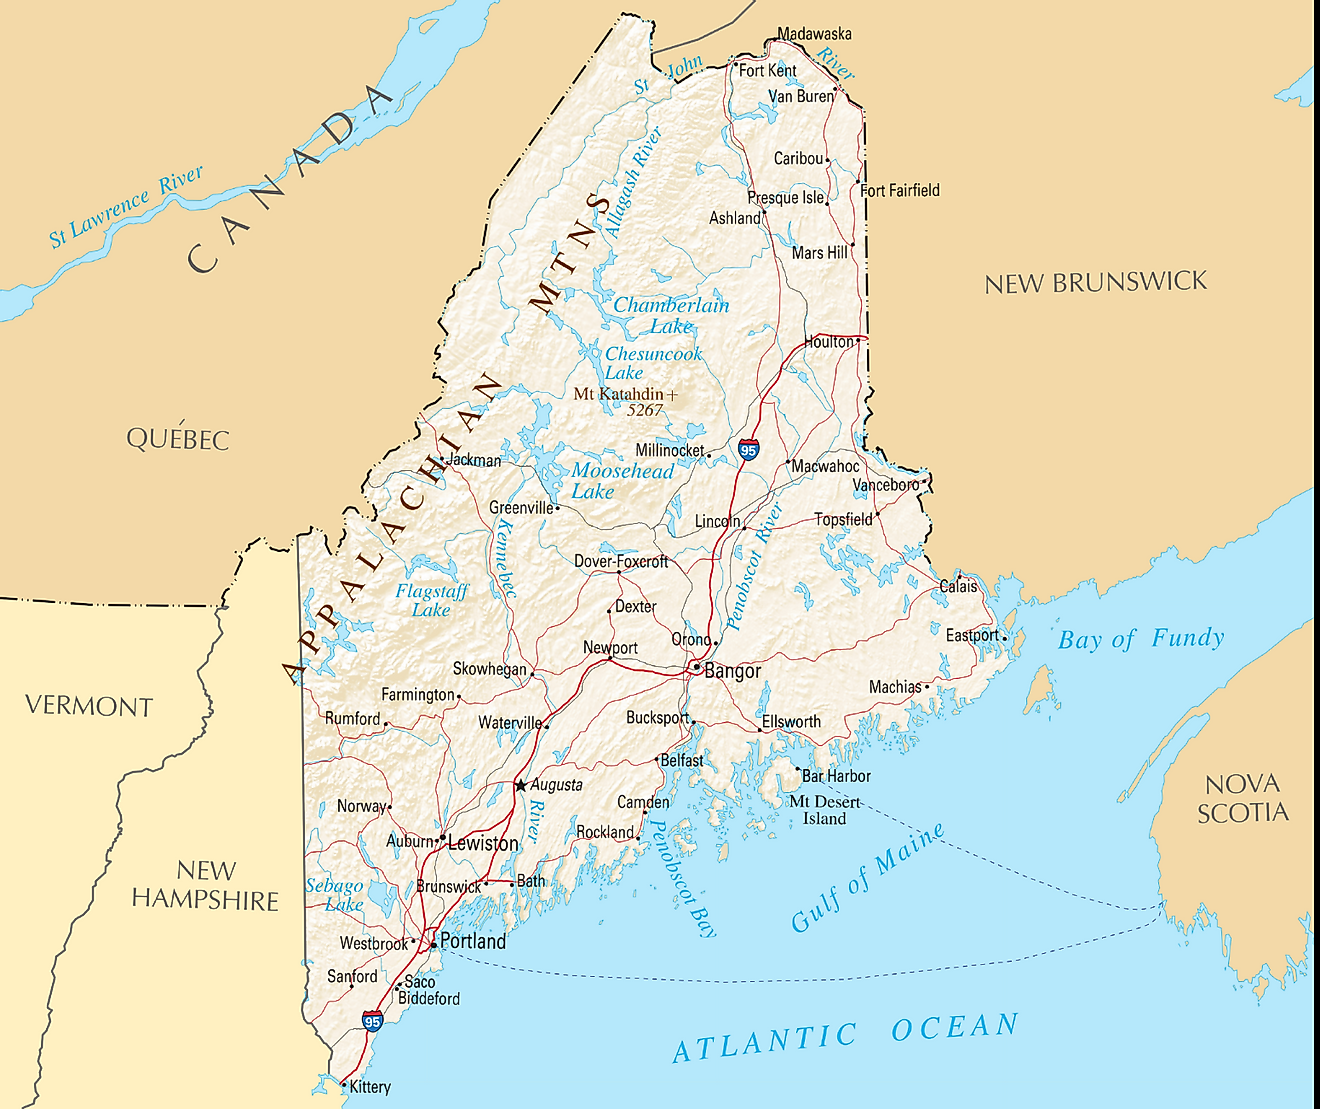 The US State of Maine Shares Its Borders With The US State of New Hampshire and The Canadian Provinces Of Quebec And New Brunswick.